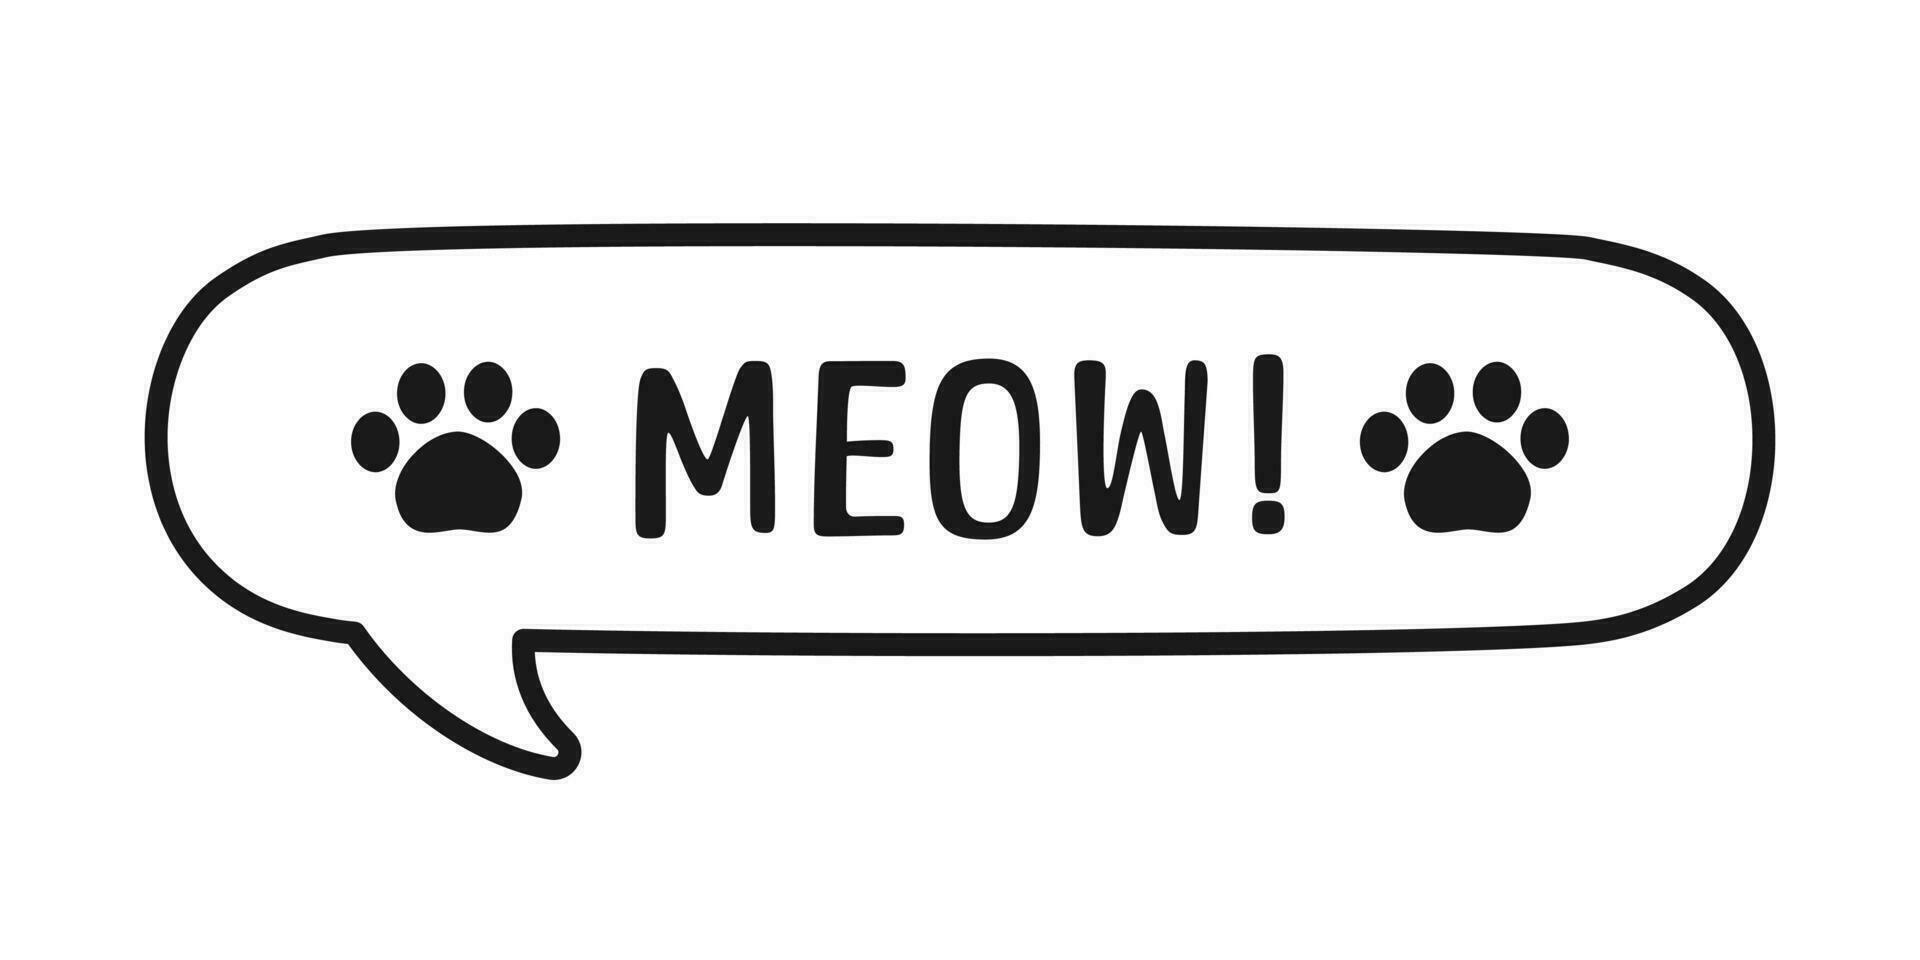 MEOW speech bubble outline doodle. Meow text. Cute hand drawn quote. Cat sound hand lettering phrase. Vector illustration for print on shirt, card, poster etc.